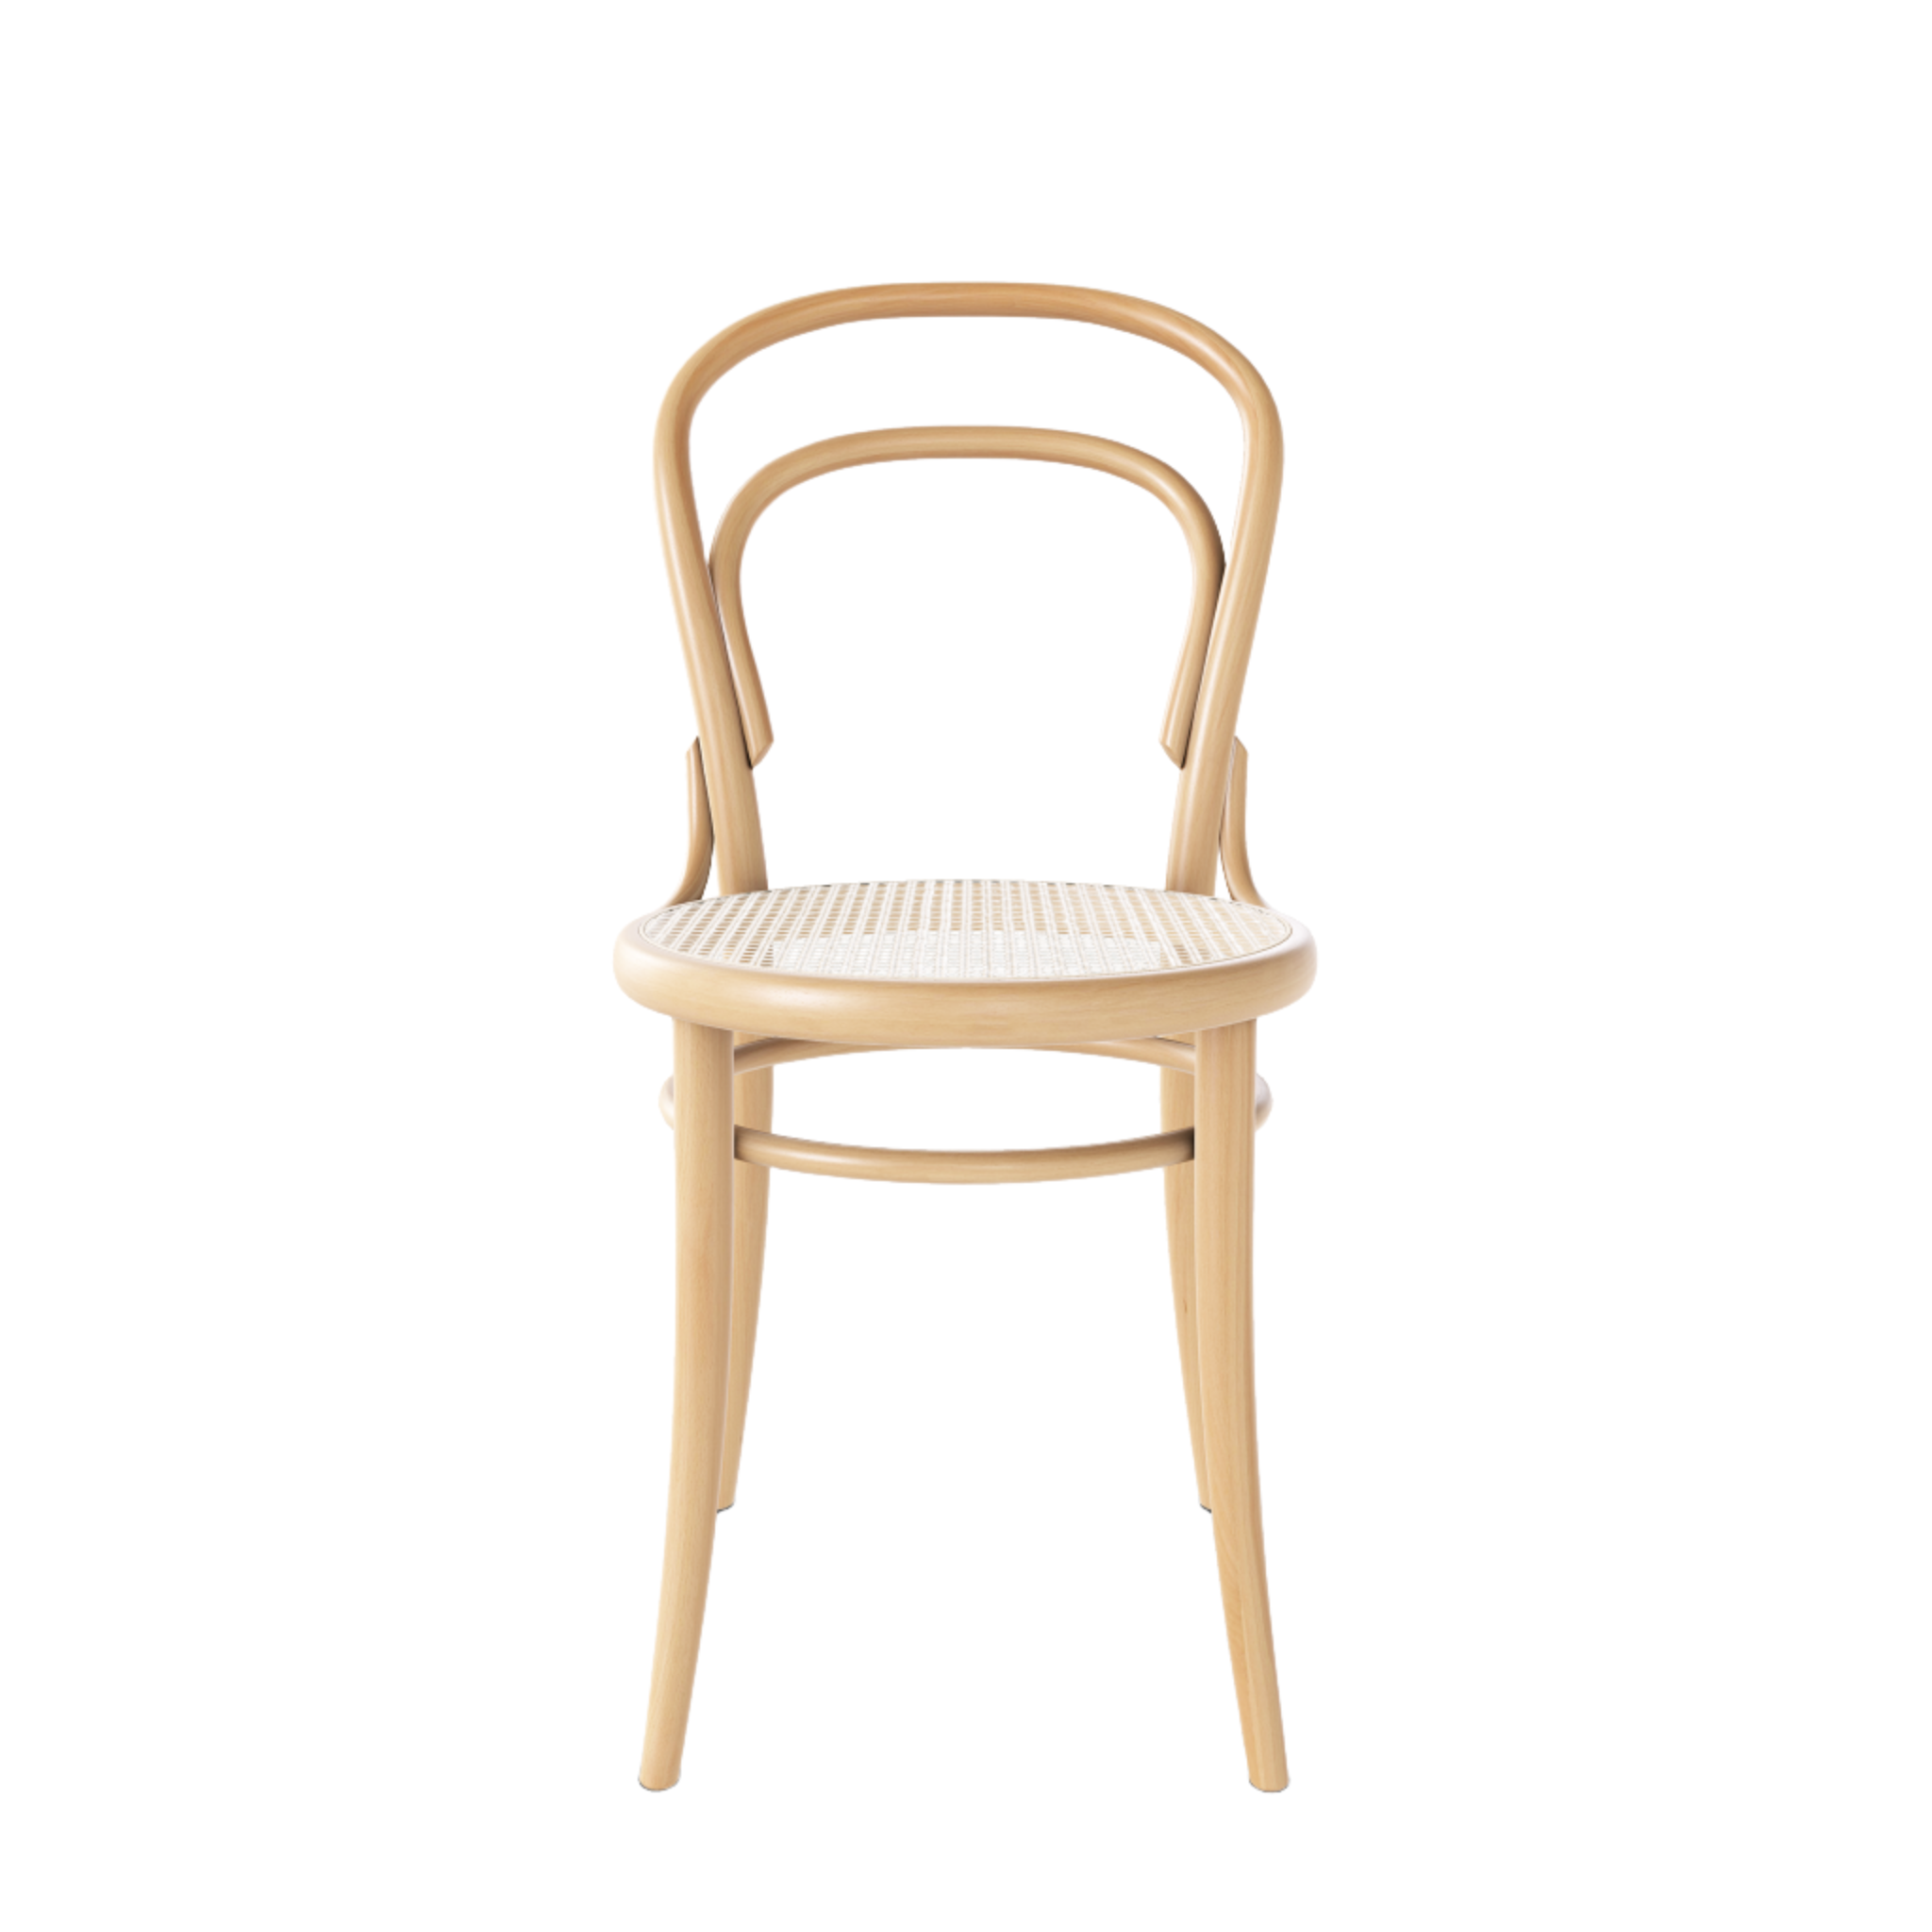 Ton 14 Dining Chair with cane seat in beech with lacquer